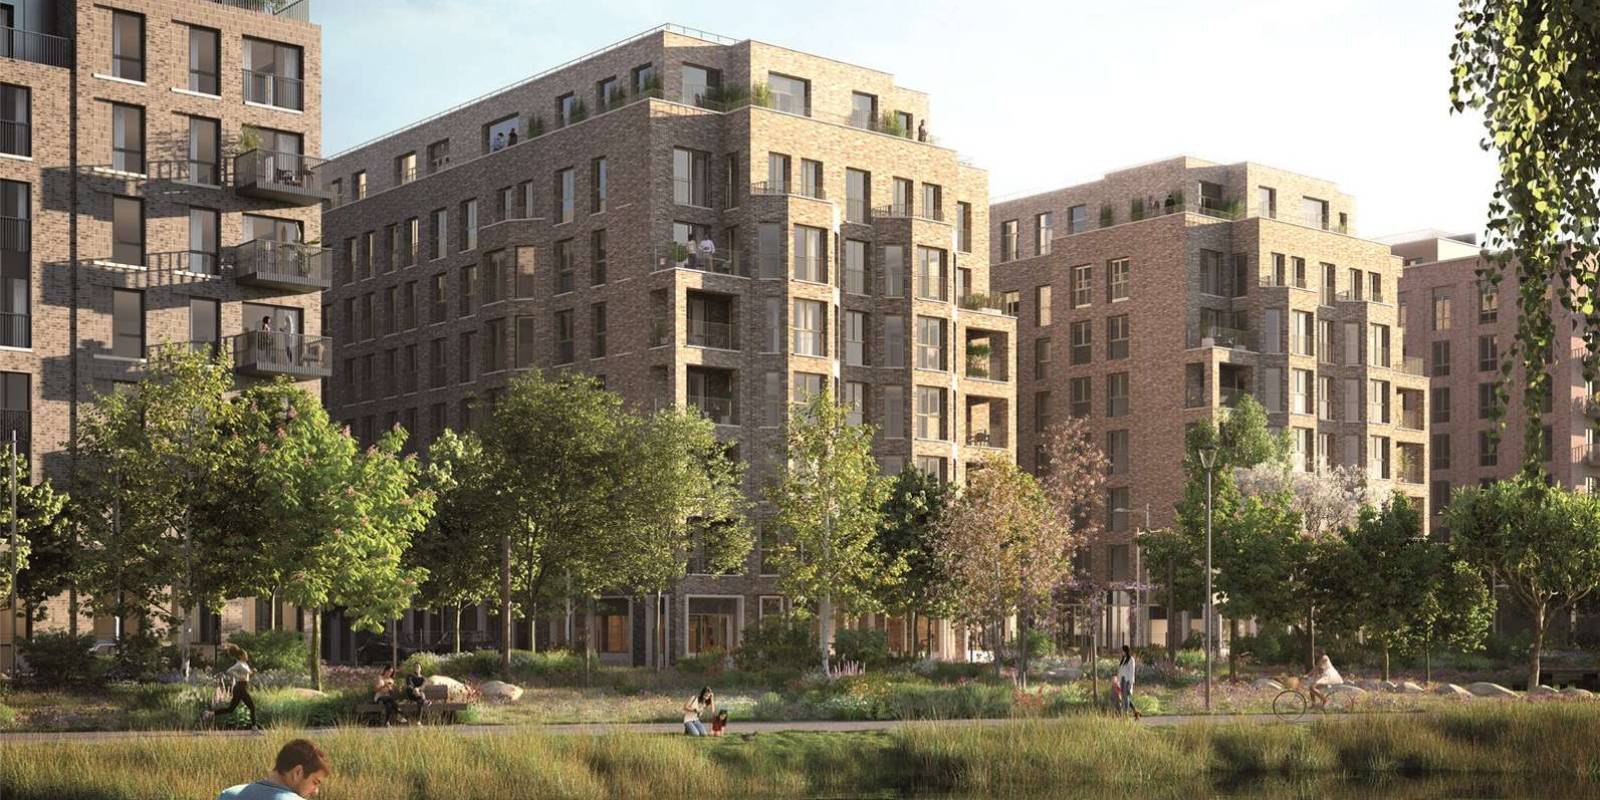 New homes in North London